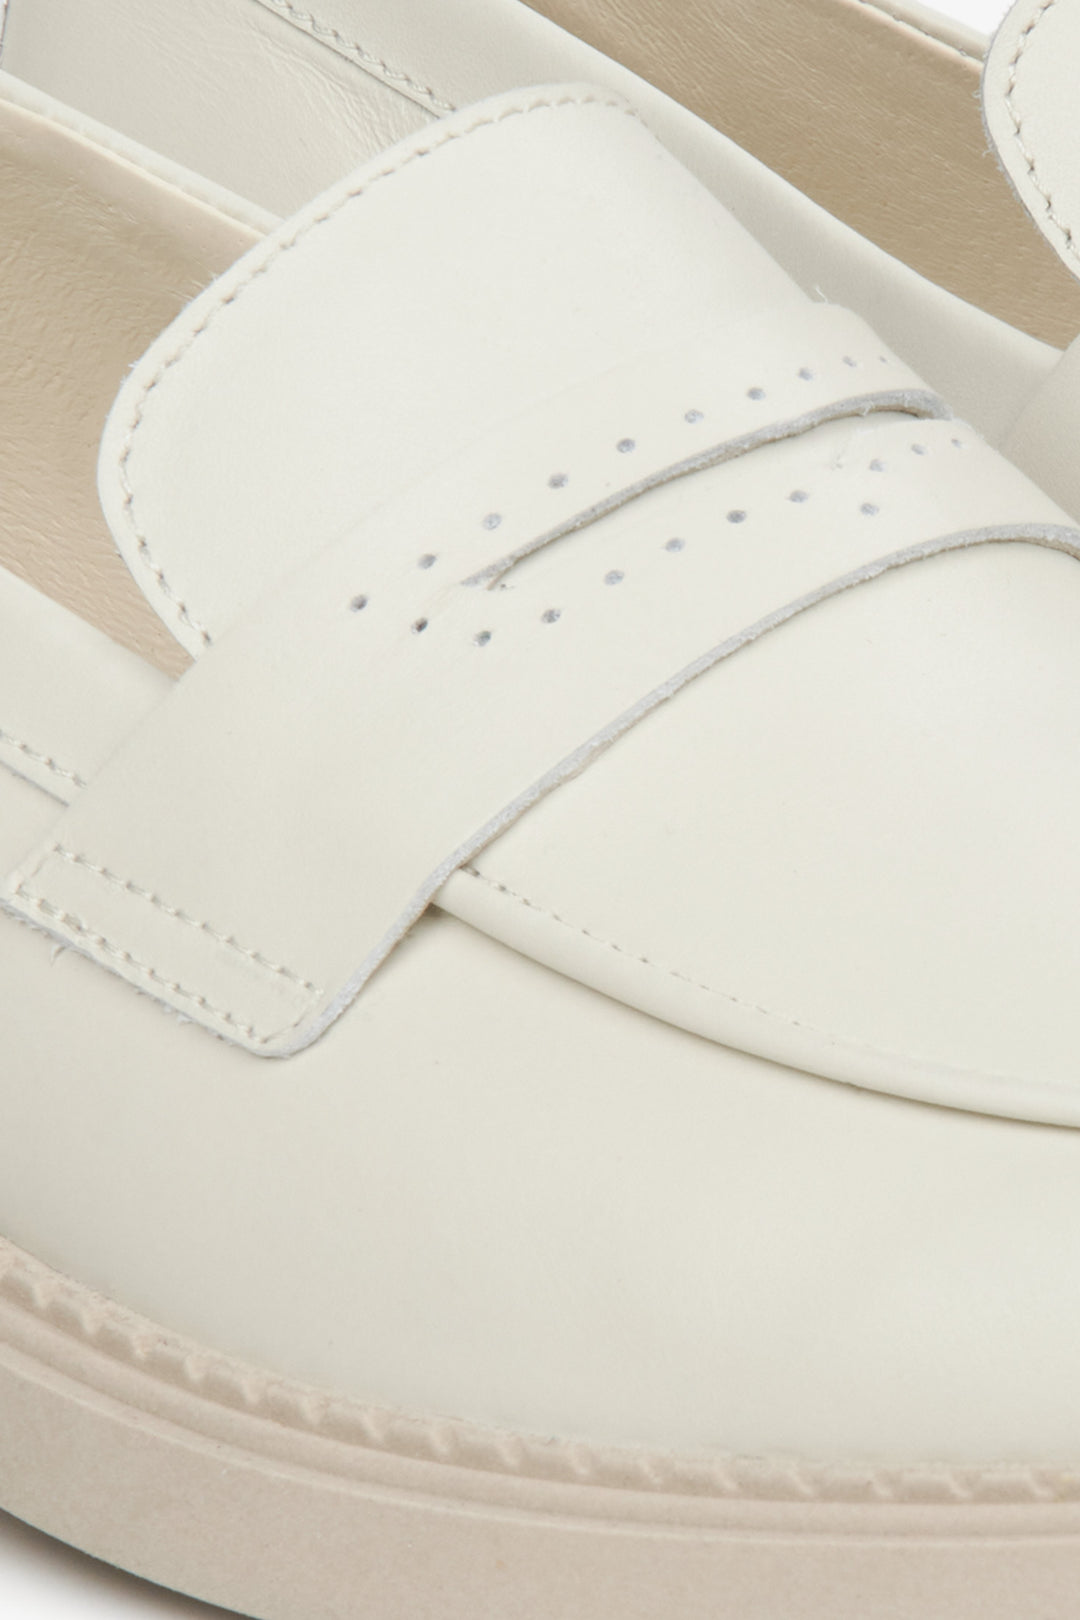 Women's leather loafers in beige colour by Estro - close-up on details.